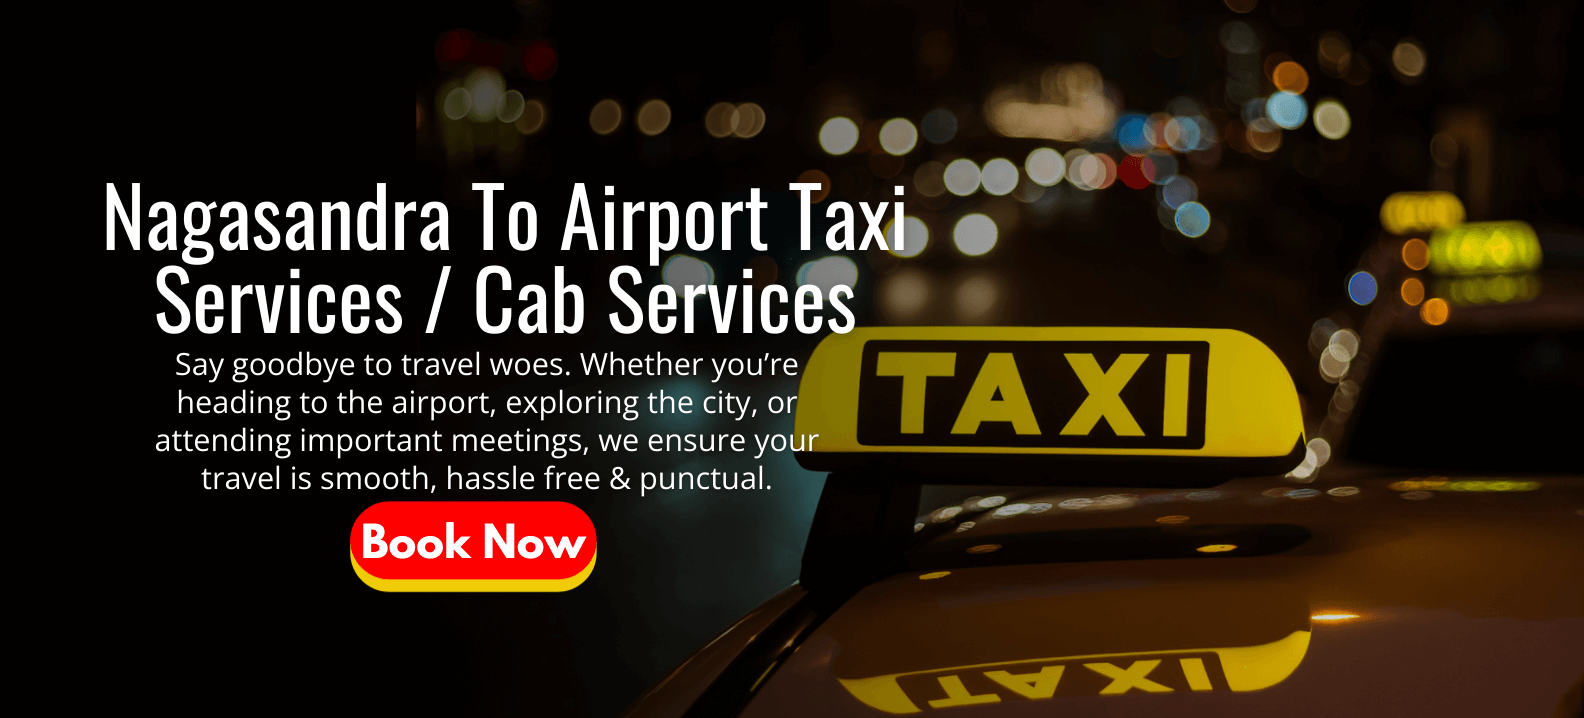 Nagasandra to Airport Taxi Services | Cab Services